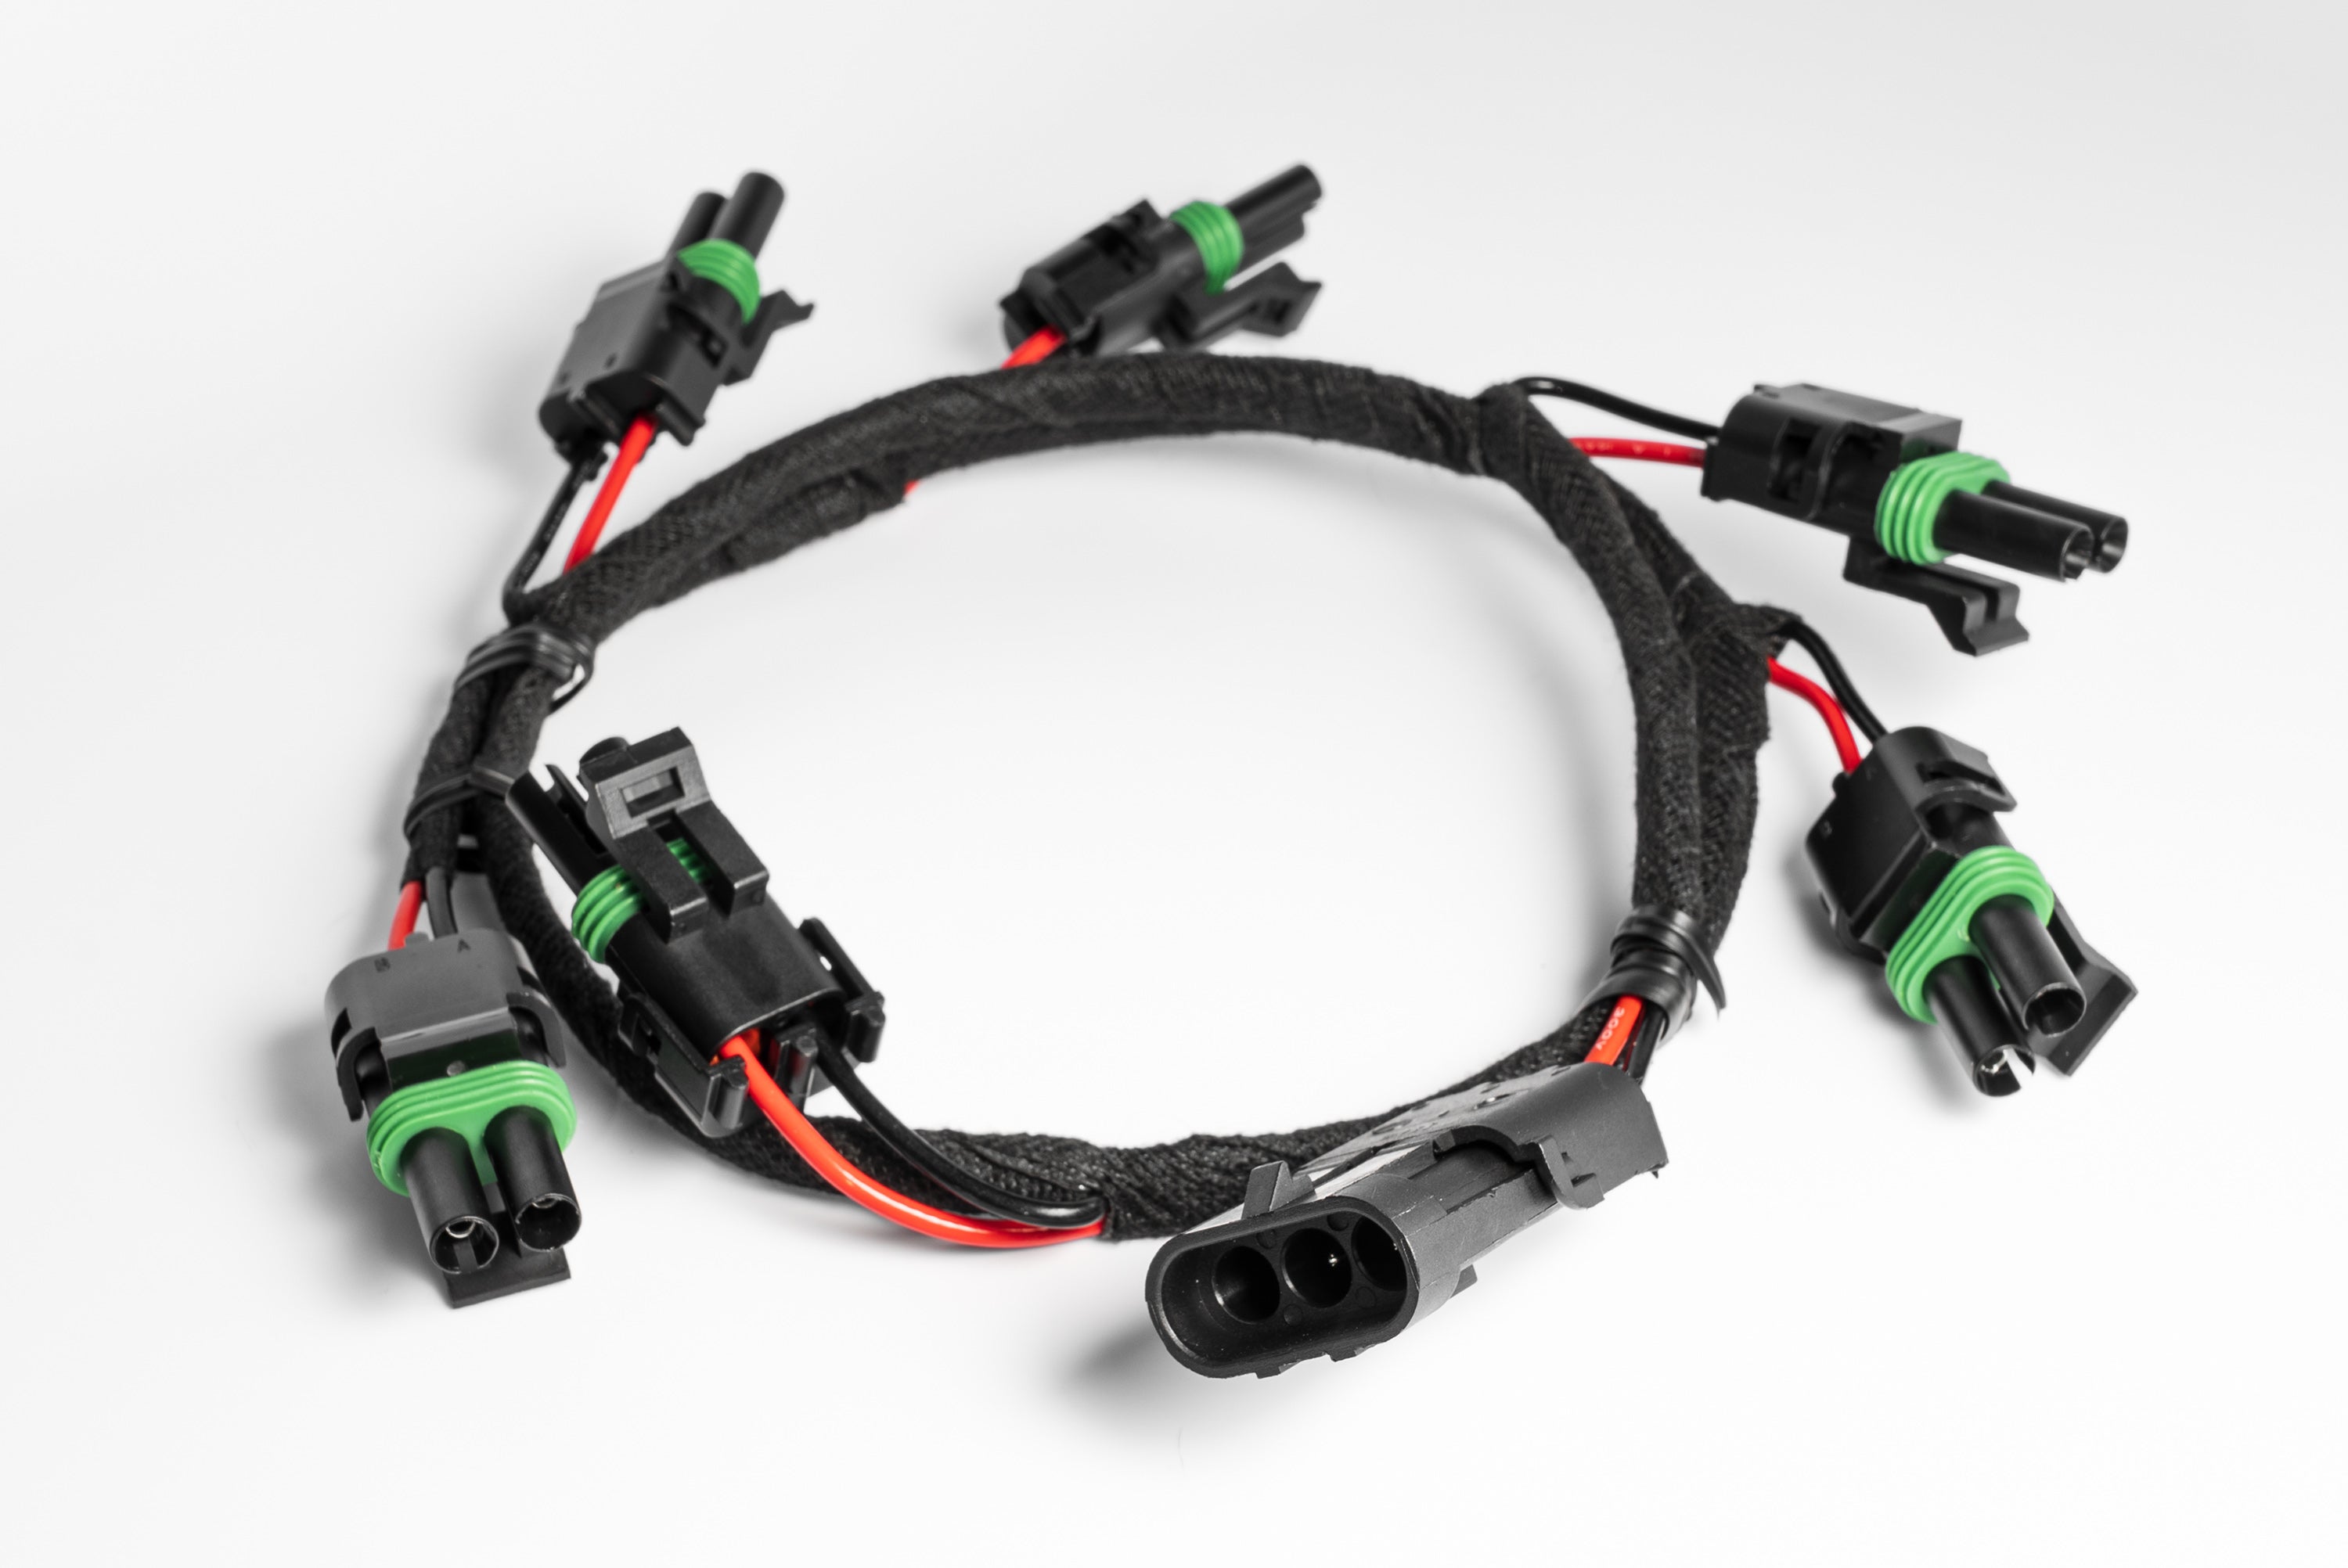 6X 2 Pole WP Connector Harness Splitter add on - SPV Harness System (Works with MANY vehicles, See Details)